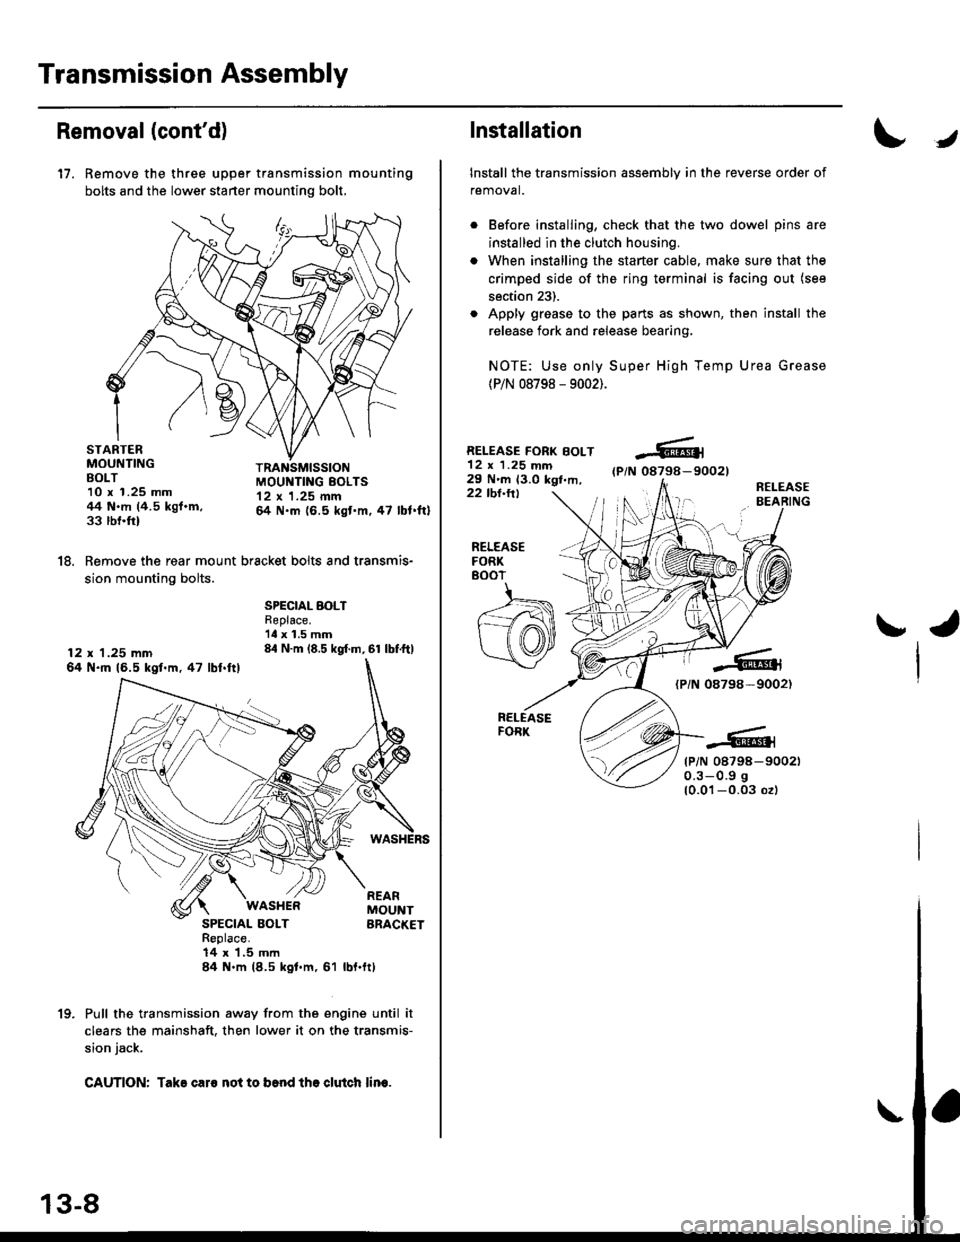 HONDA CIVIC 1996 6.G Workshop Manual Transmission Assembly
Removal(contd)
17. Remove the three upper transmission mounting
bolts and the lower starter mounting bolt,
STARTERMOUNTINGBOLT10 x 1.25 mm44 N.m (4.5 kgf.m,33 rbnftl
TRANSMISSIO